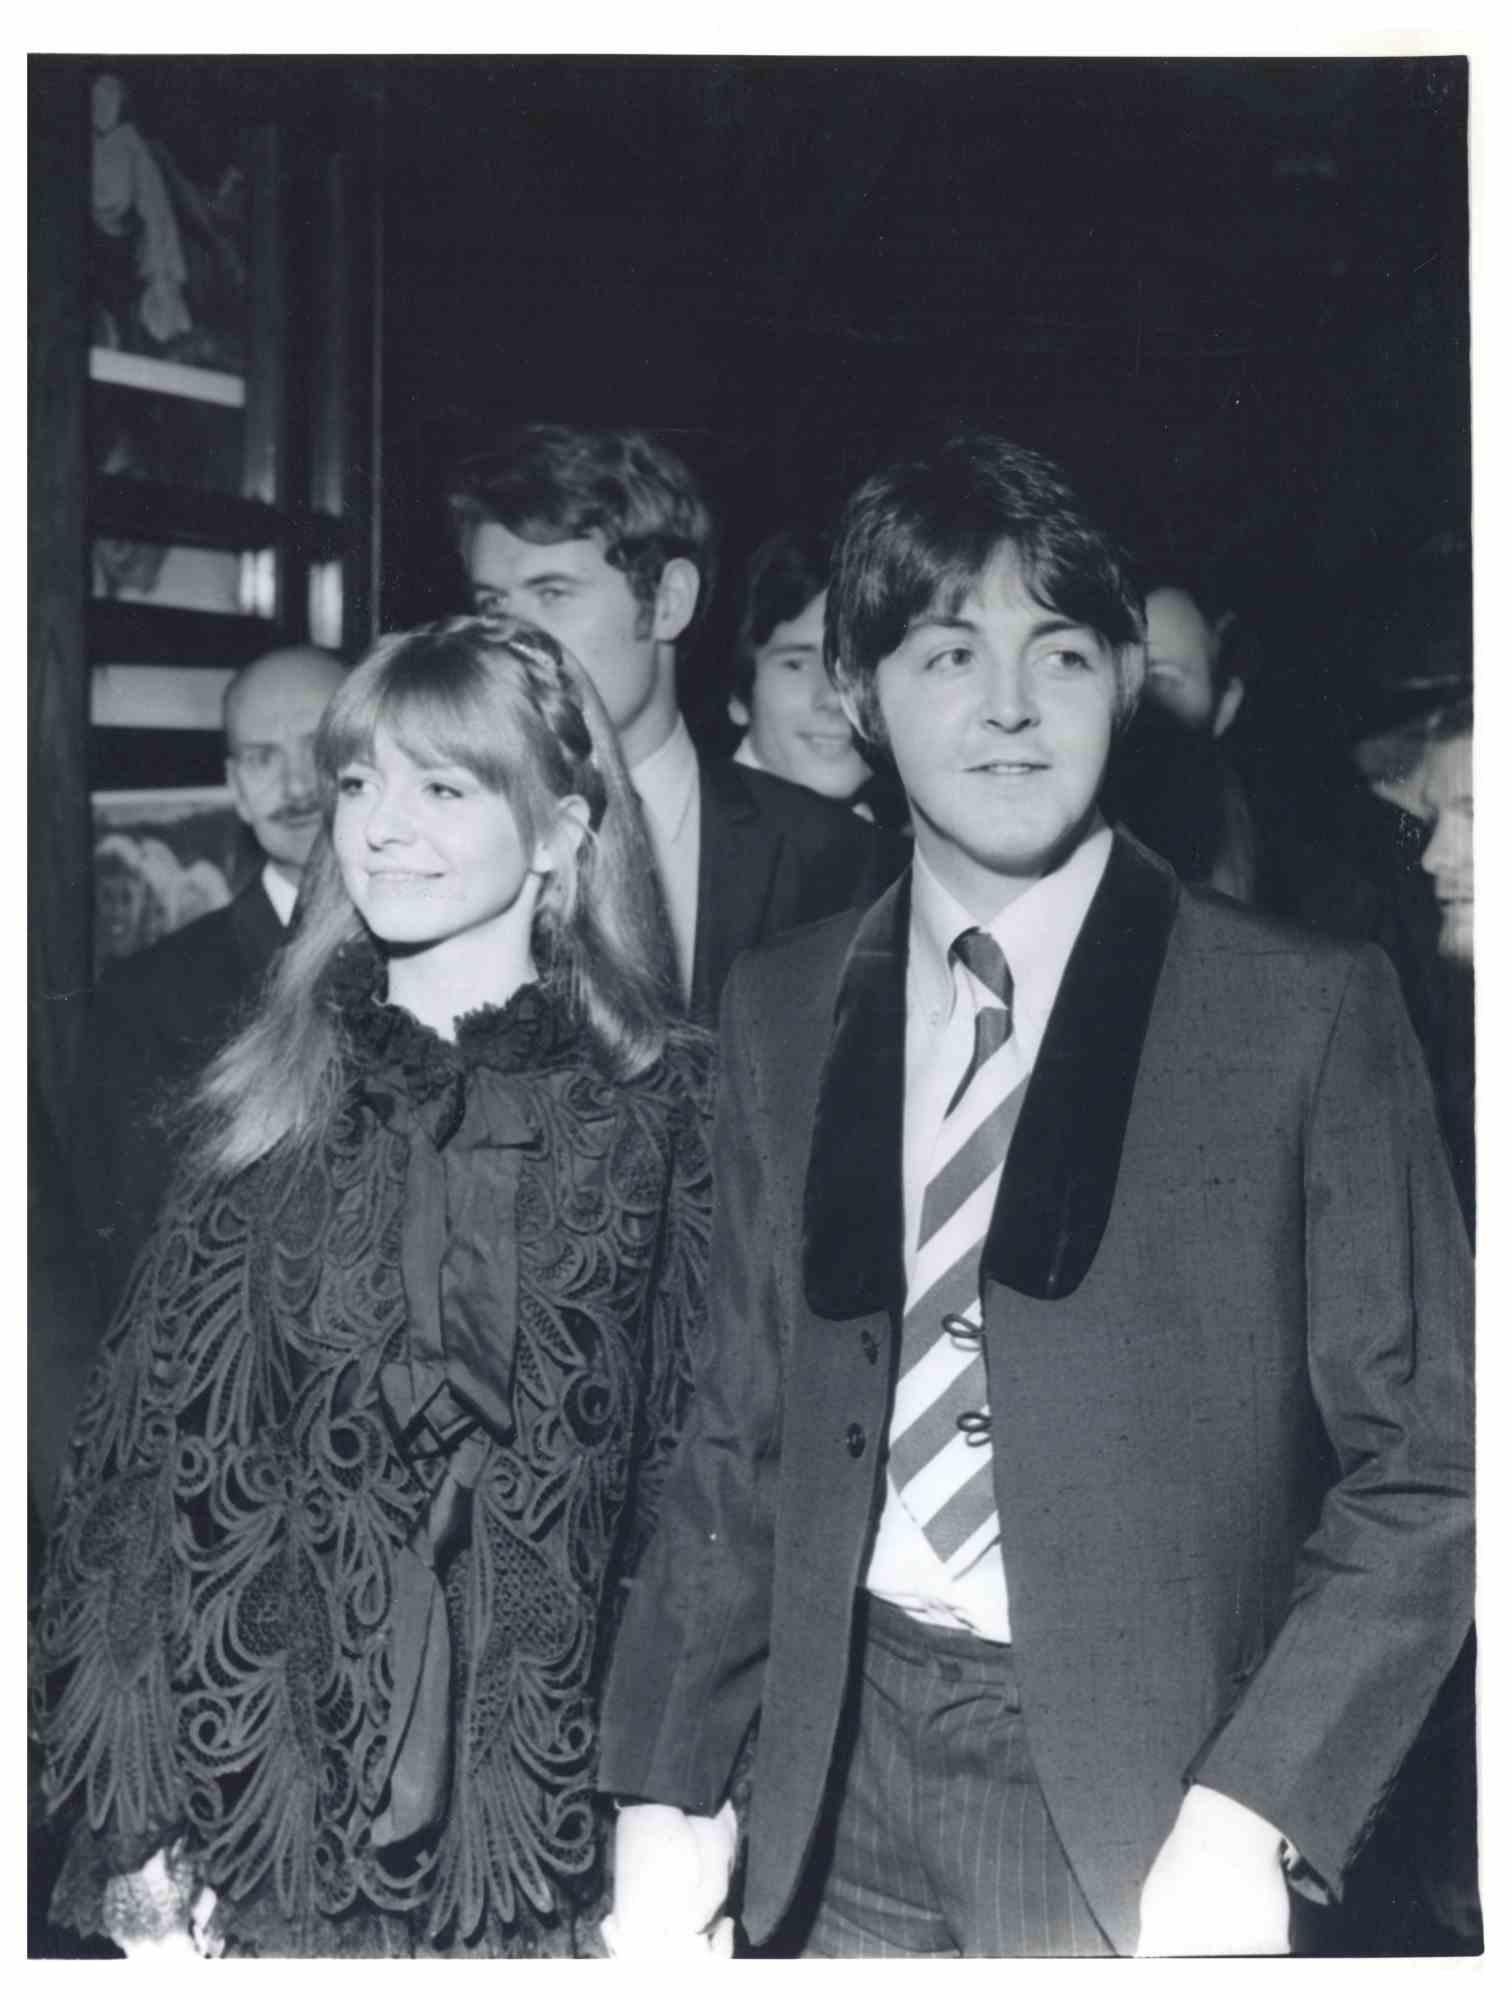 Unknown Portrait Photograph - Paul McCartney and Jane Asher in 1968 - Vintage Photograph